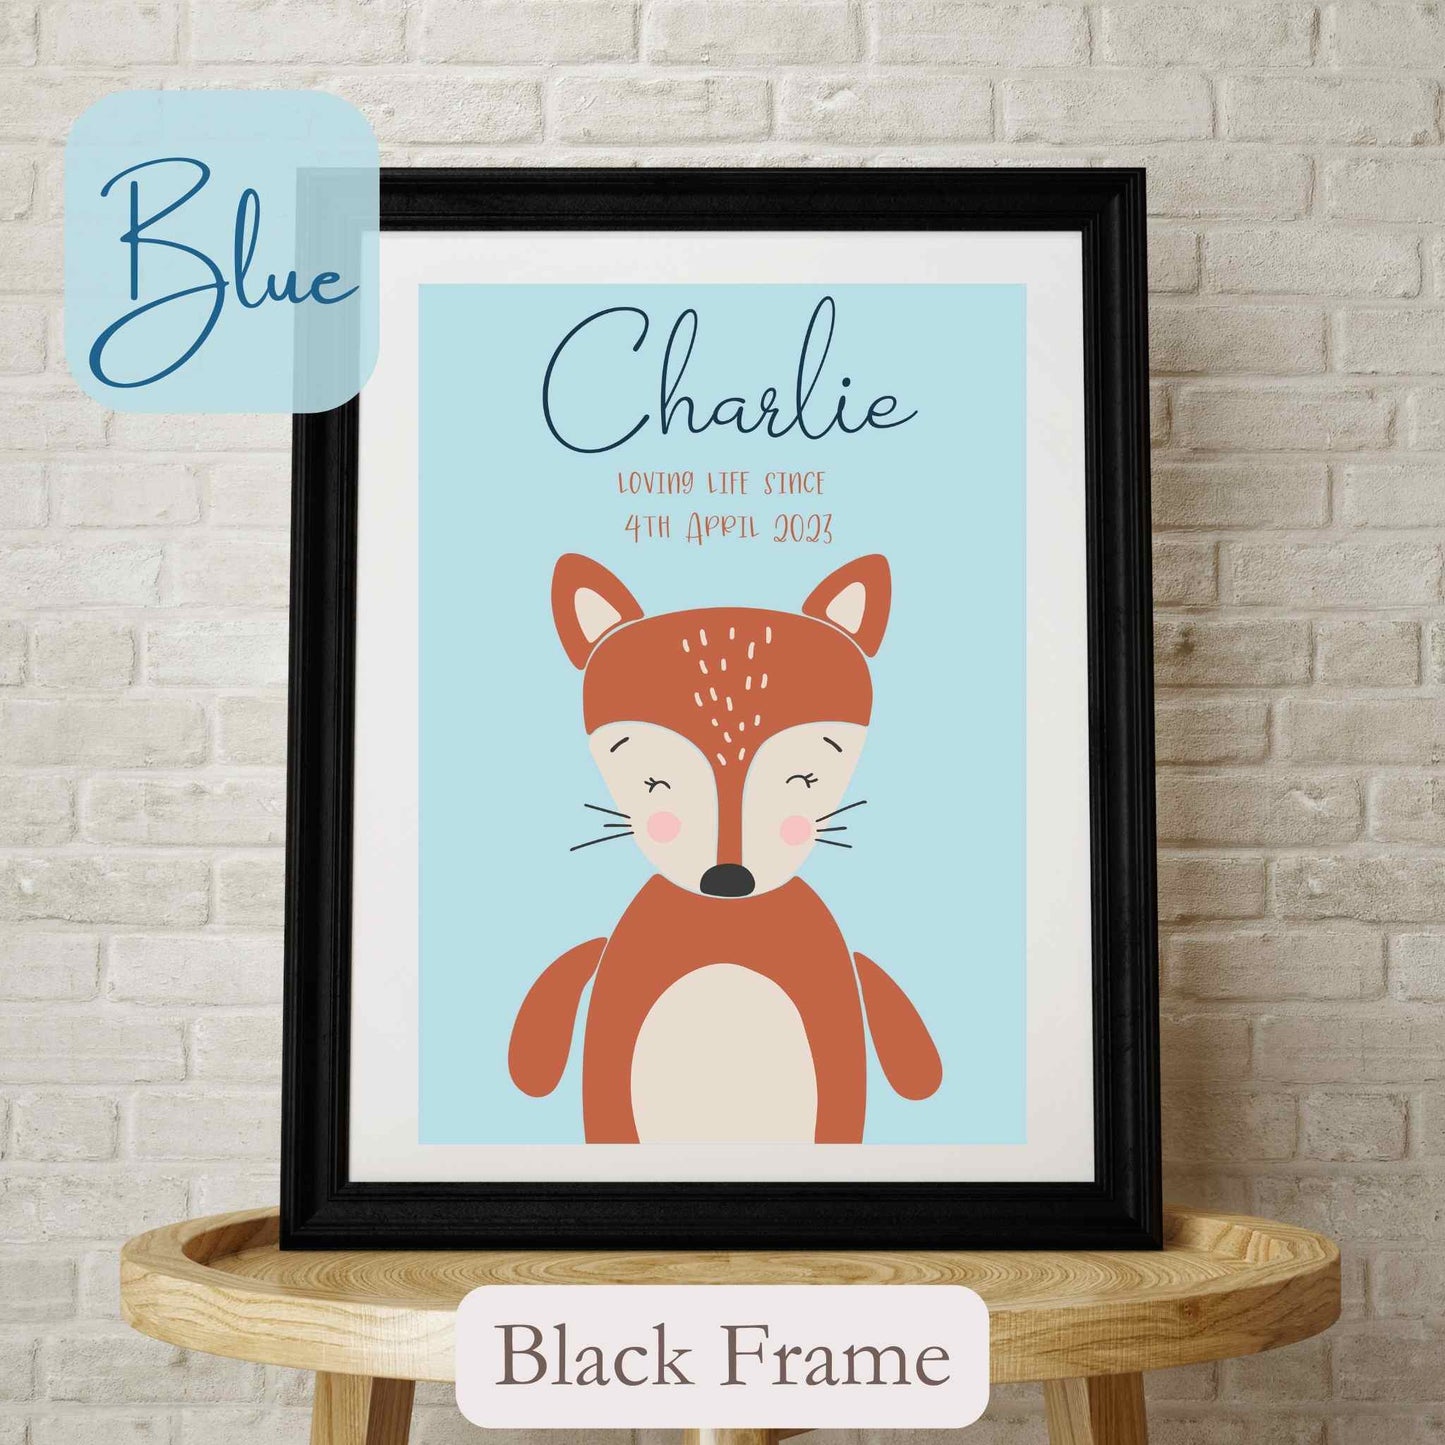 Personalised Framed Print with cute Fox, on blue coloured background with child’s name, and wording under name. Black Frame.